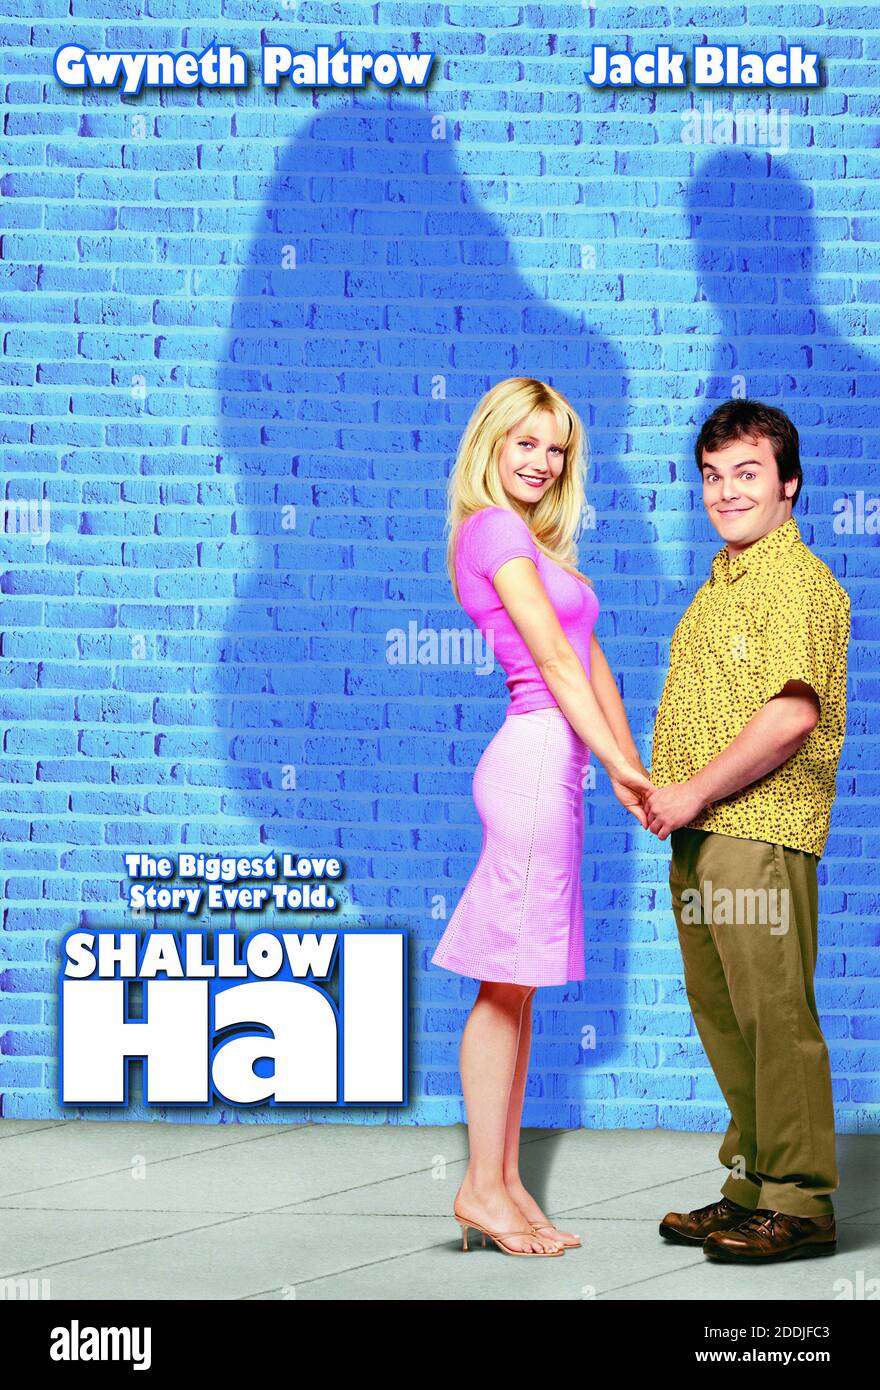 Poster - Gwyneth Paltrow, Jack Black, 'Shallow Hal' (2001)  Photo credit: Twentieth Century Fox / The Hollywood Archive / File Reference # 34078-0077FSTHA Stock Photo